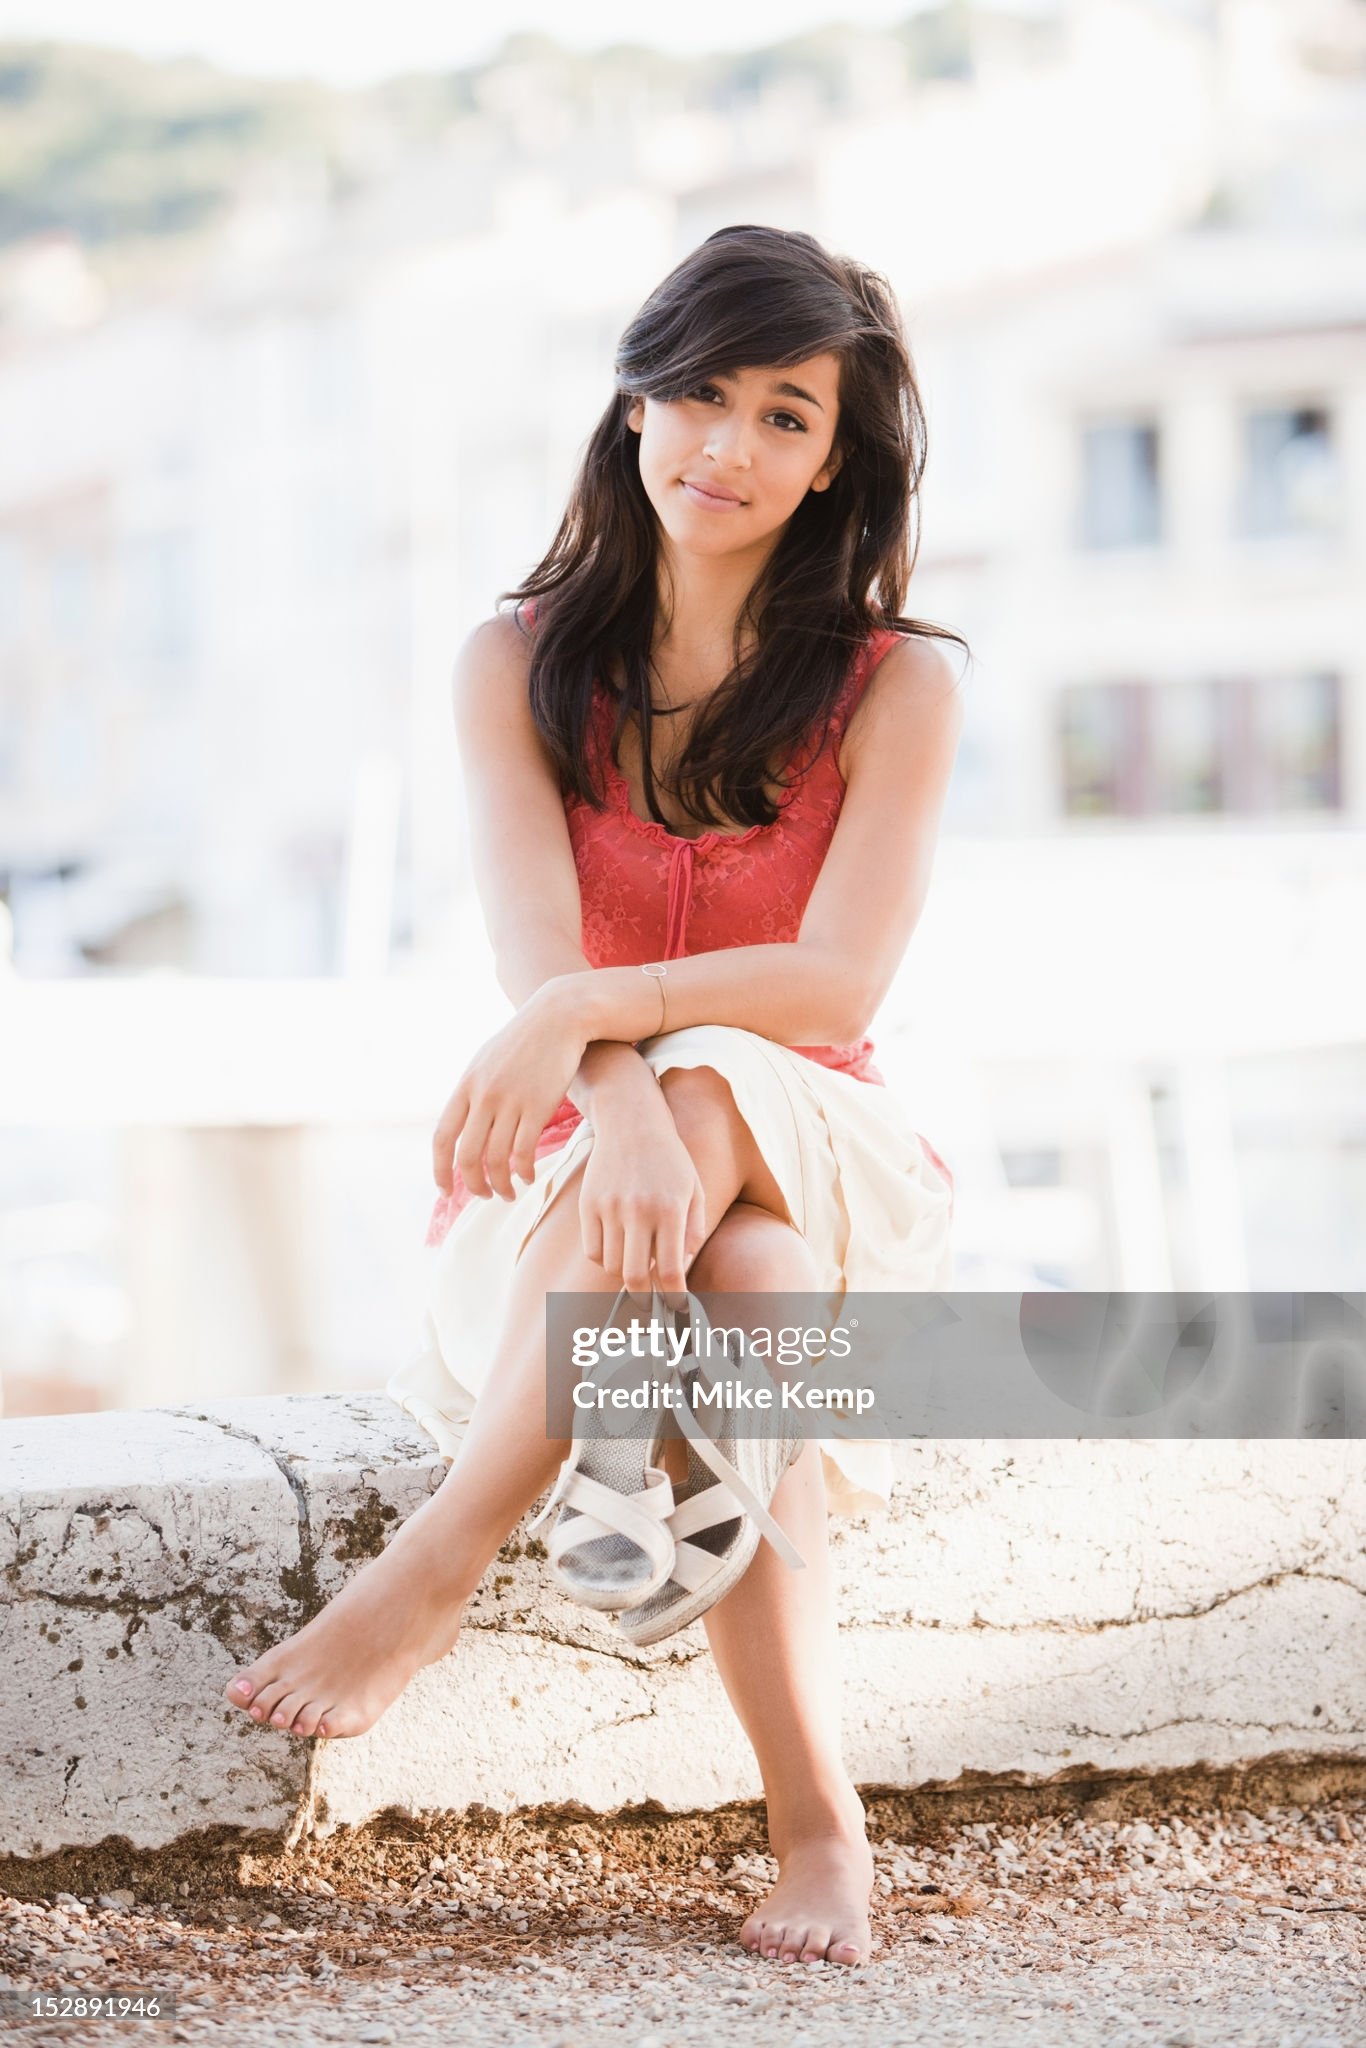 https://media.gettyimages.com/id/152891946/photo/france-cassis-young-woman-sitting-on-stone-wall.jpg?s=2048x2048&amp;w=gi&amp;k=20&amp;c=4ugdNQihiqxNINB0y-oP2h__AKuZAkFxJfx7uUyGdC0=